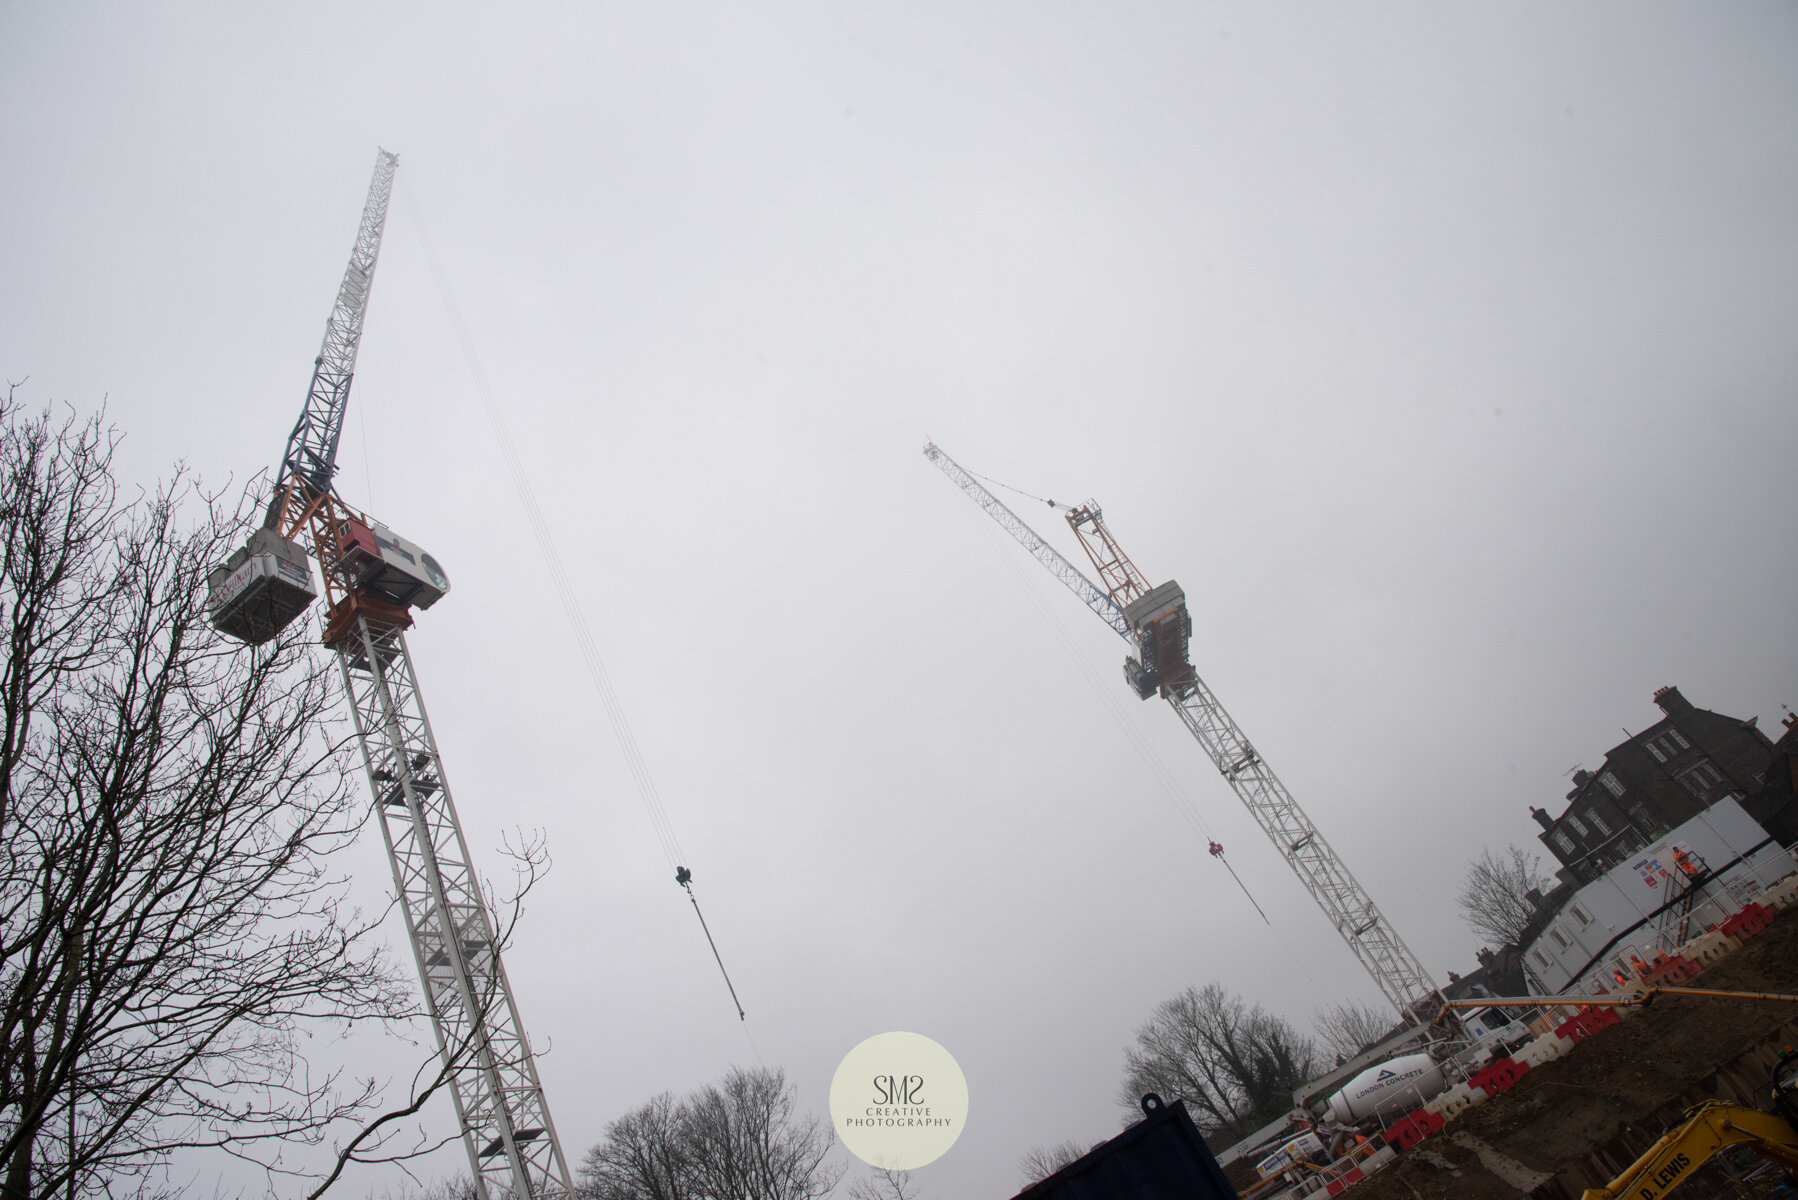  The two cranes are used to move objects from one part of the site to the other with ease and precision. 